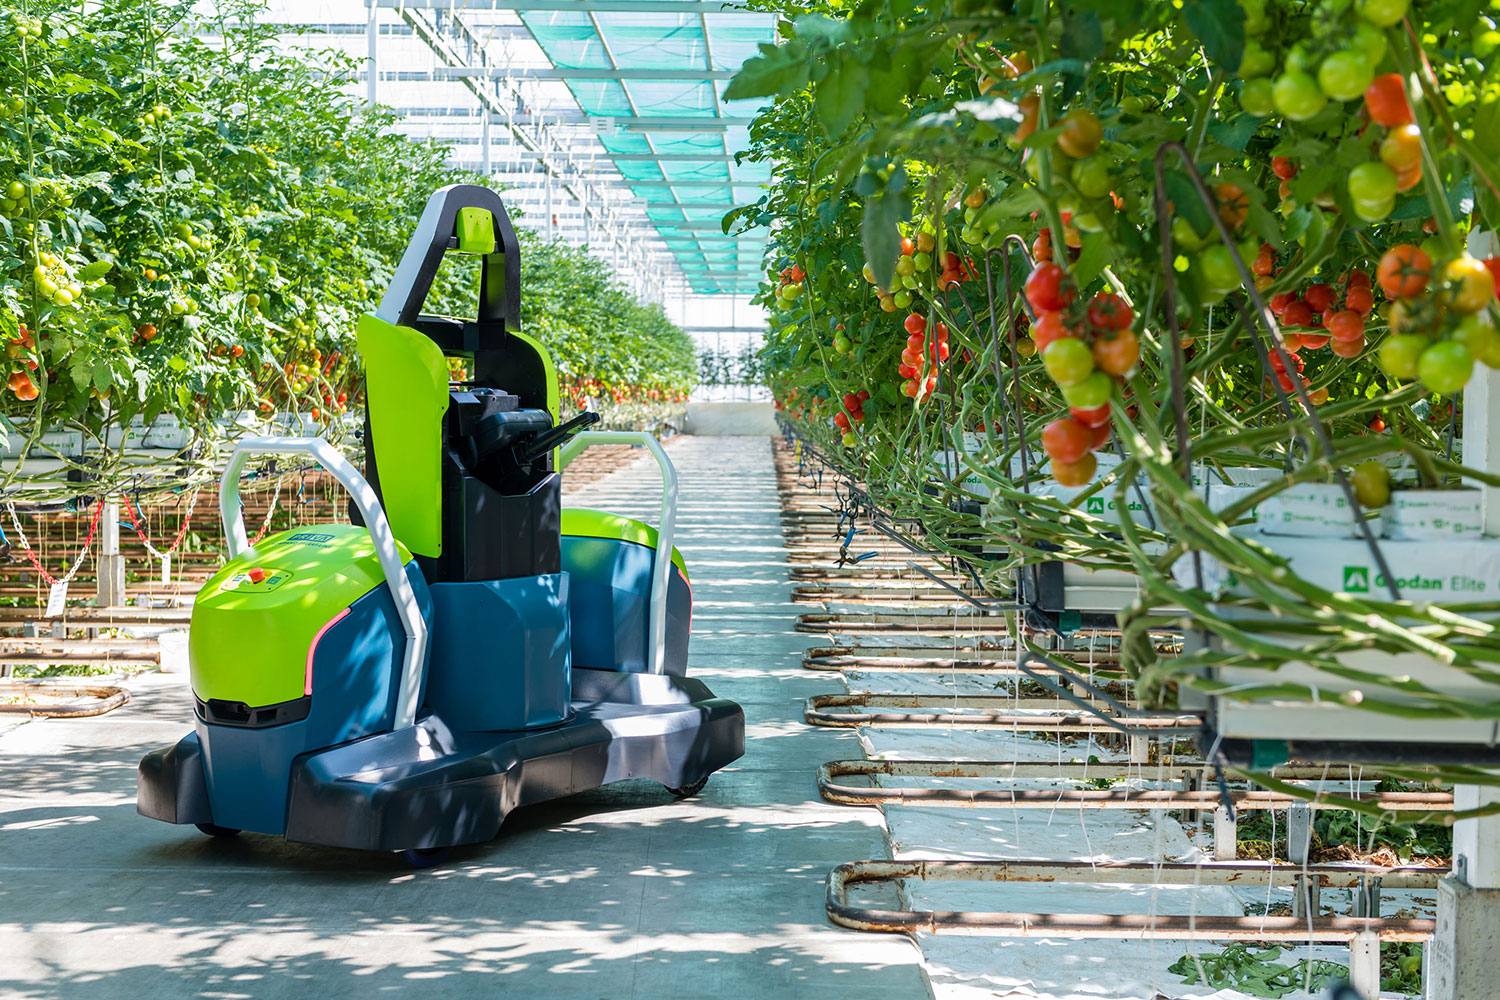 Priva’s fully automated leaf-cutting robot for tomato can operate 24/7.